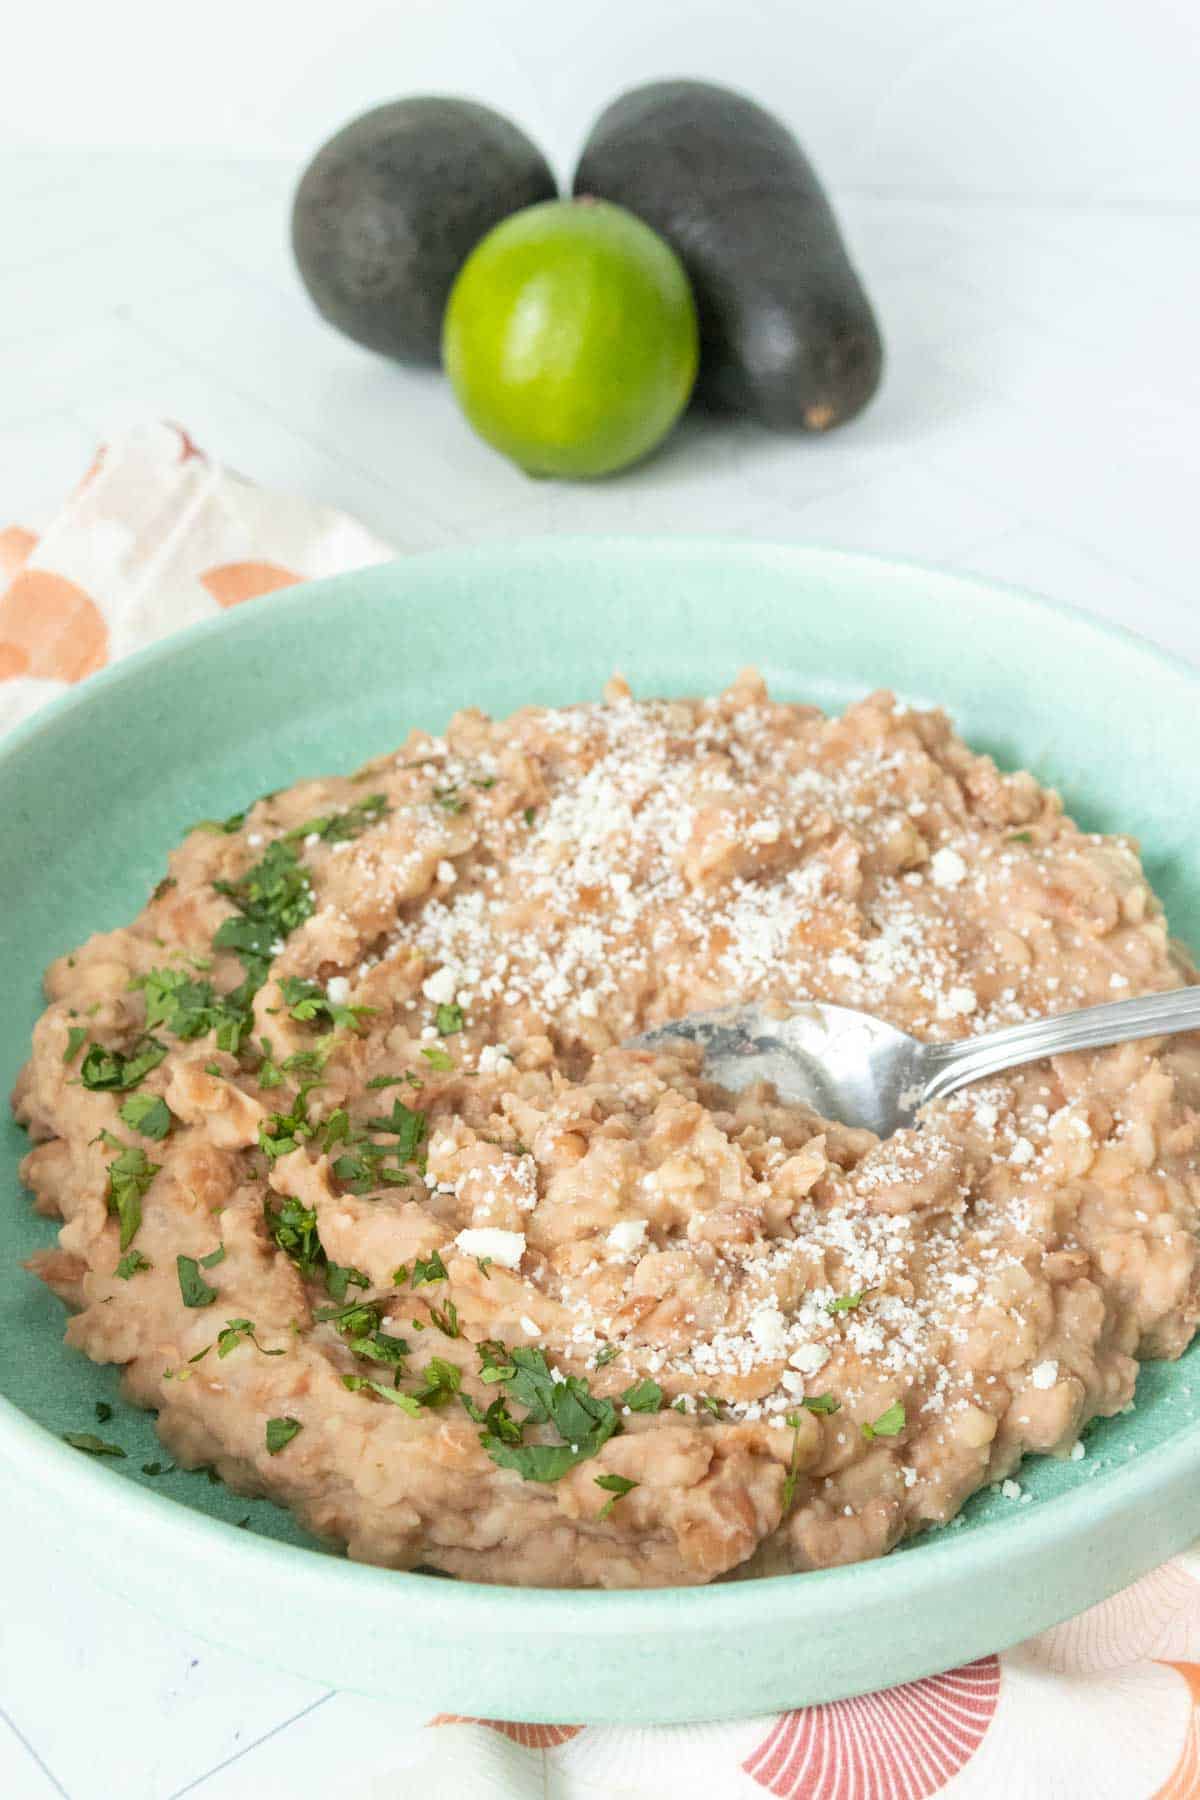 A bowl of refried beans with cilantro and cheese on a table.